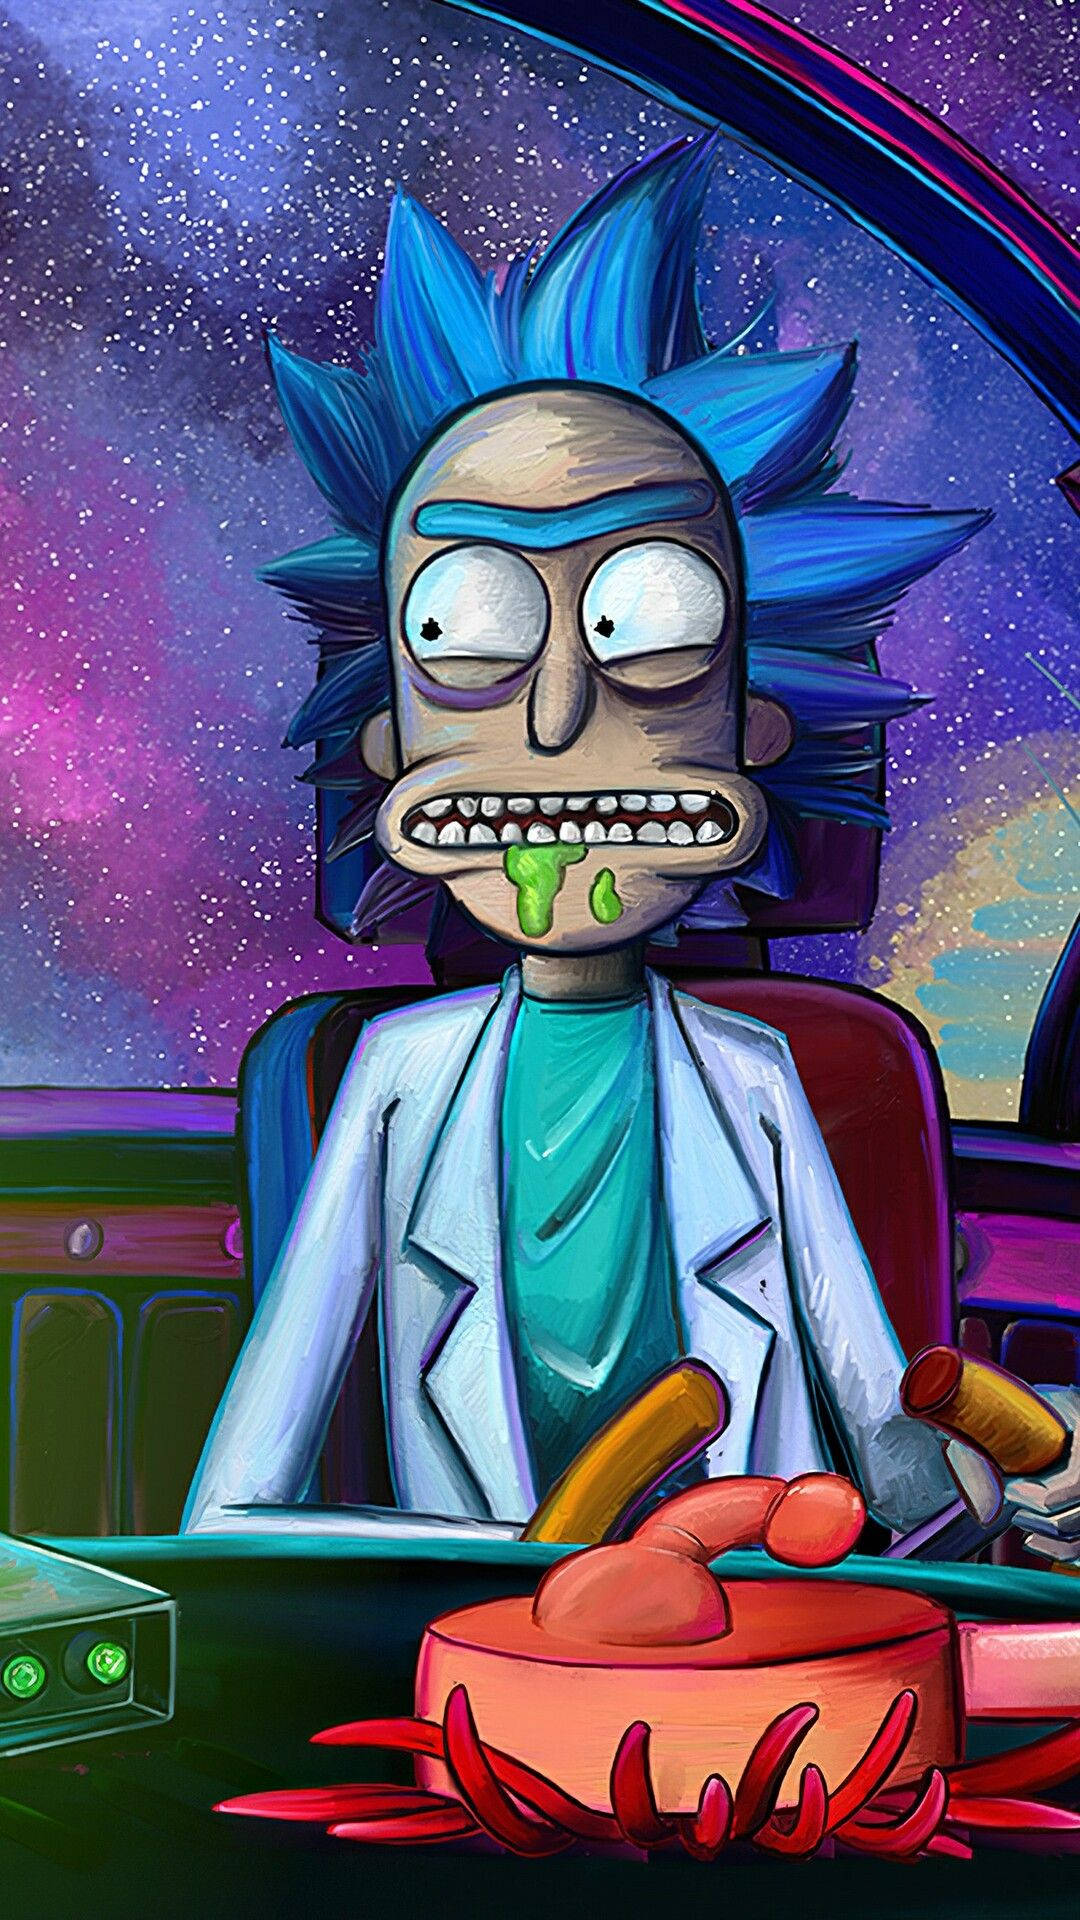 Creativity is KEY when you're rolling up Rick and Morty inspired doobies! Wallpaper